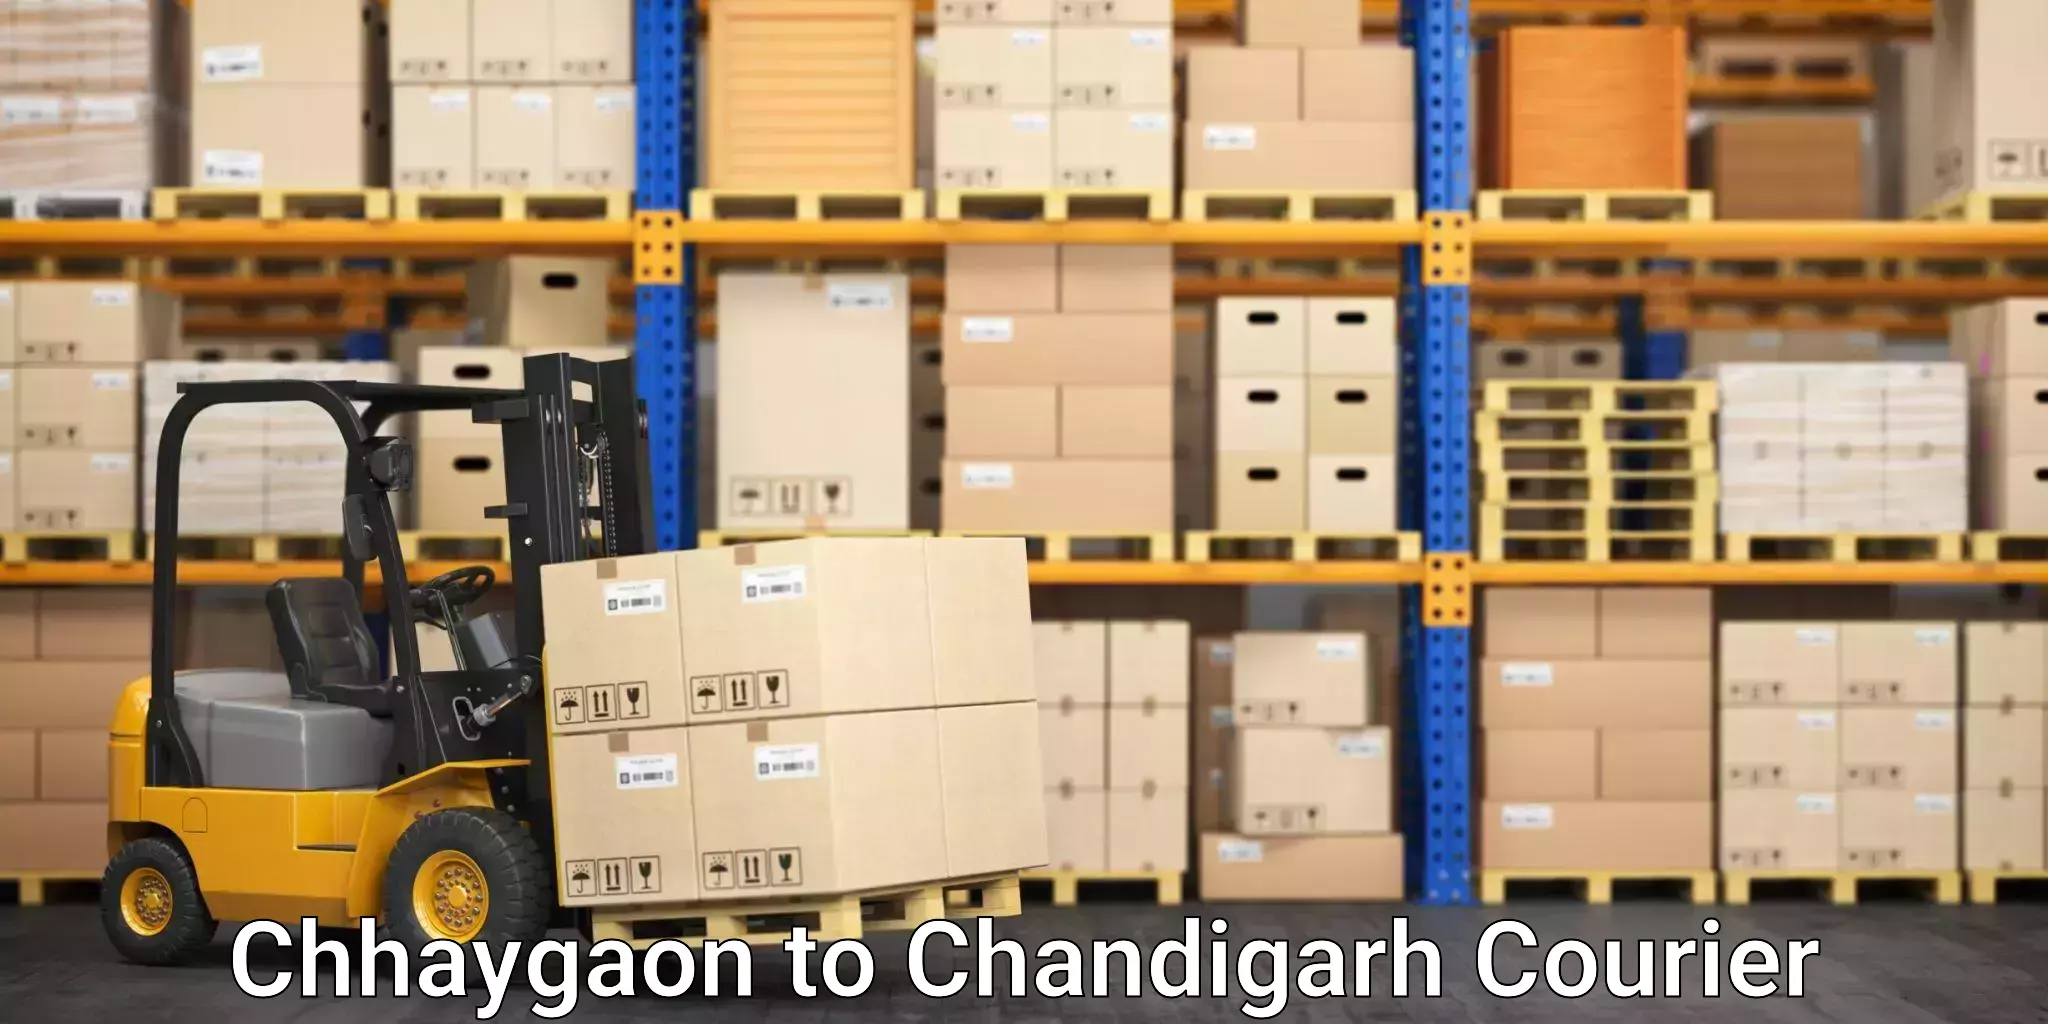 Next-day delivery options Chhaygaon to Chandigarh